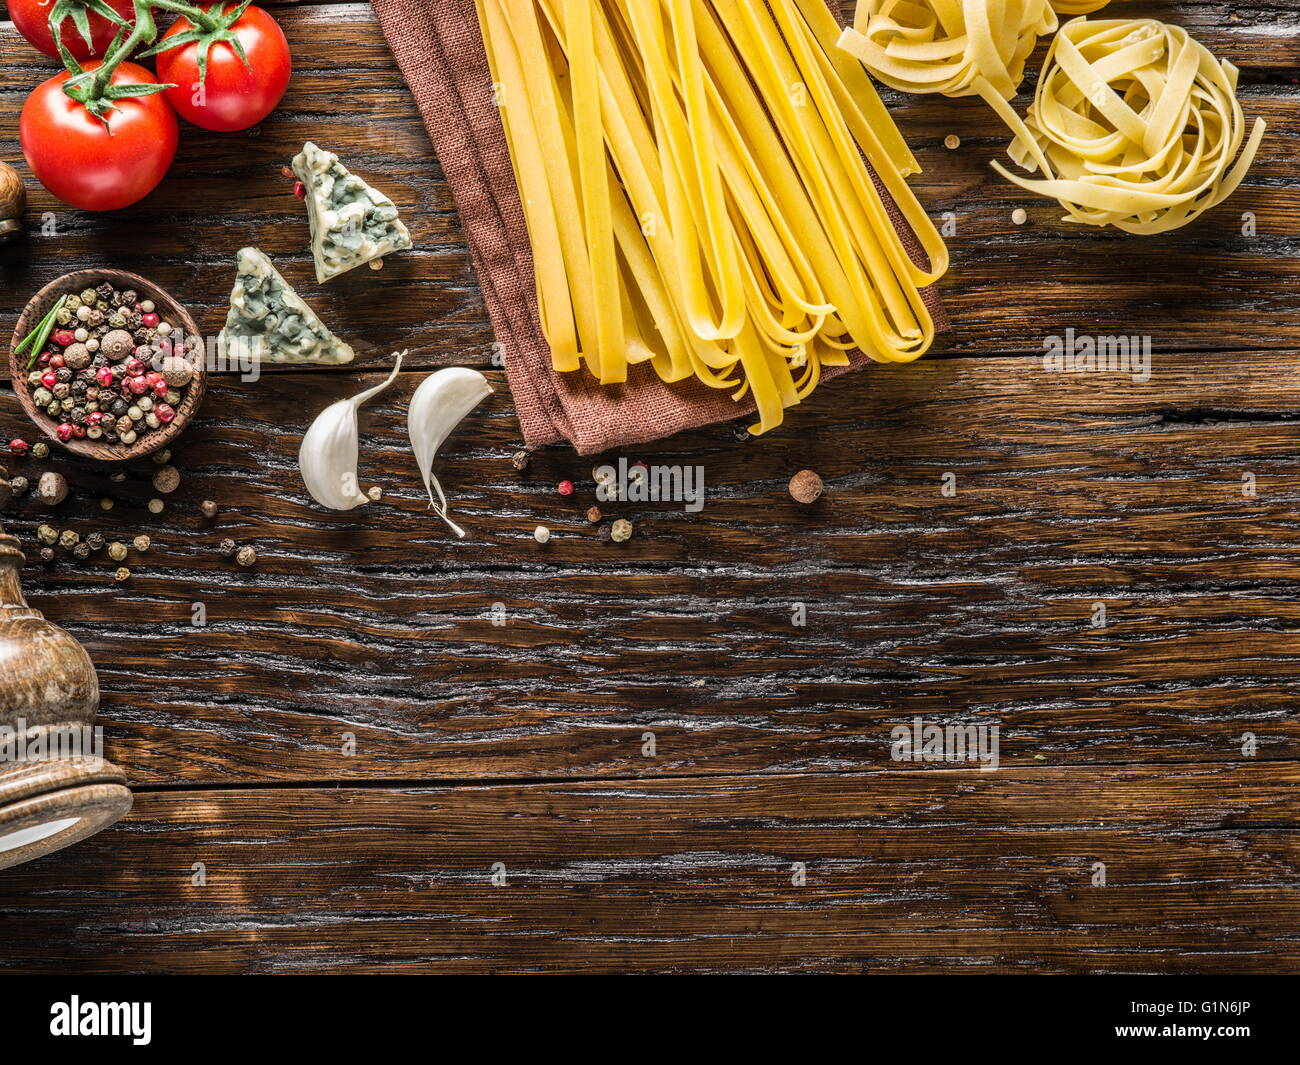 Pasta ingredients. Cherry-tomatoes, spaghetti pasta blue cheese on the wooden table. Stock Photo